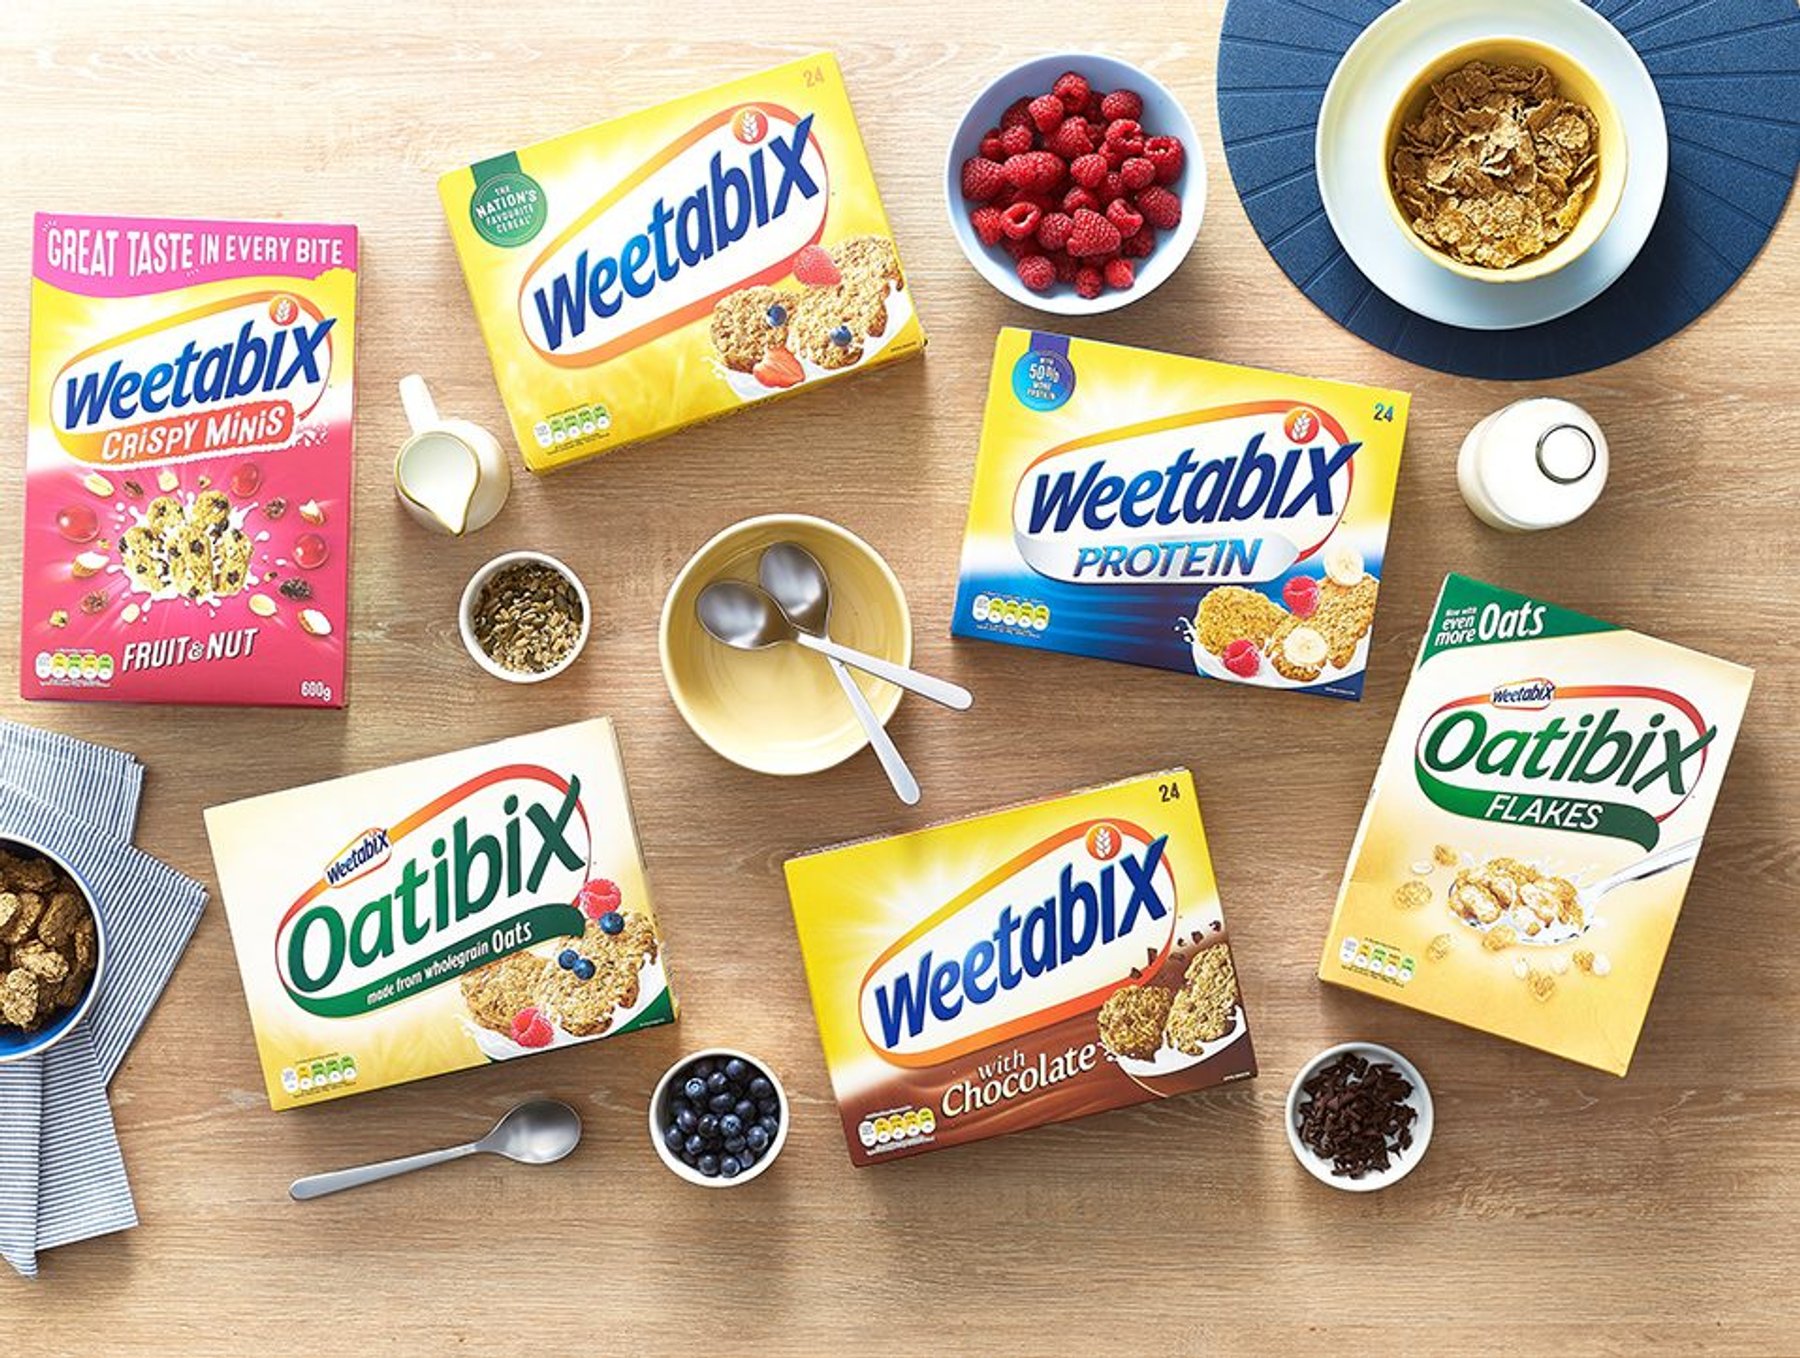 Weetabix sold to US firm after breakfast cereal fails to catch on